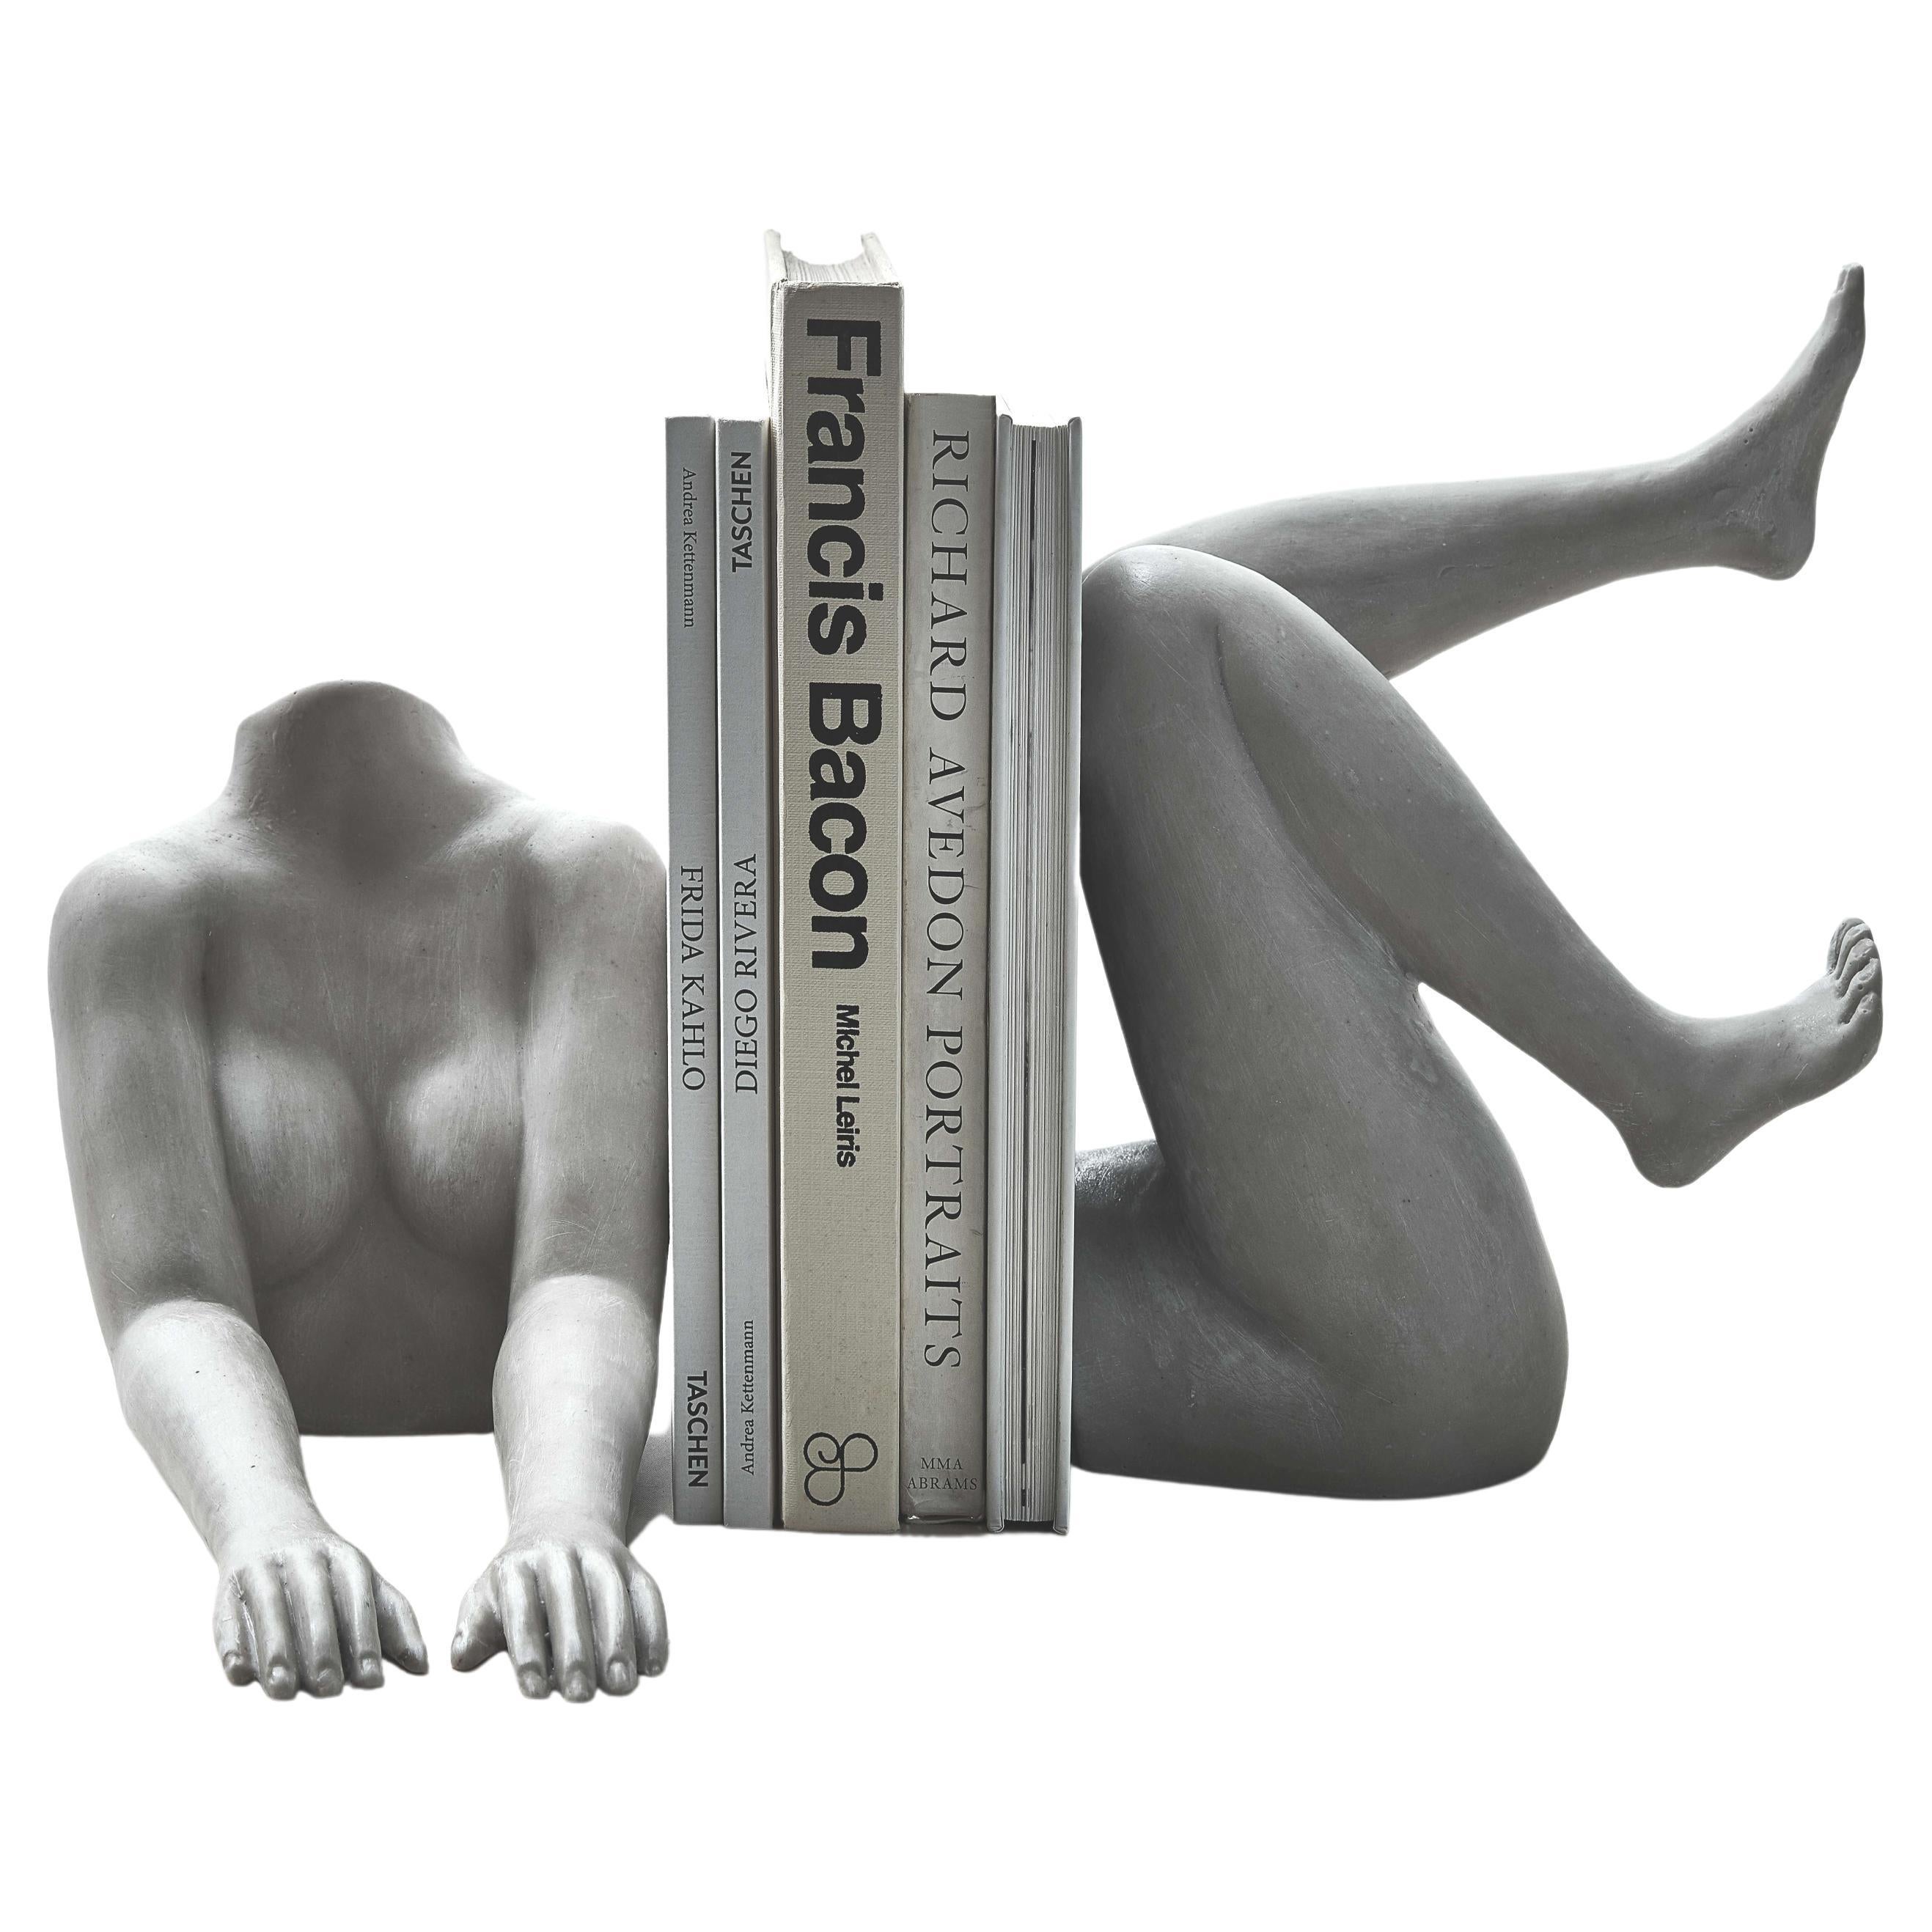 Il Corpo S Sculptural Bookends Portraying Female Body Hand Crafted Resin Stone For Sale